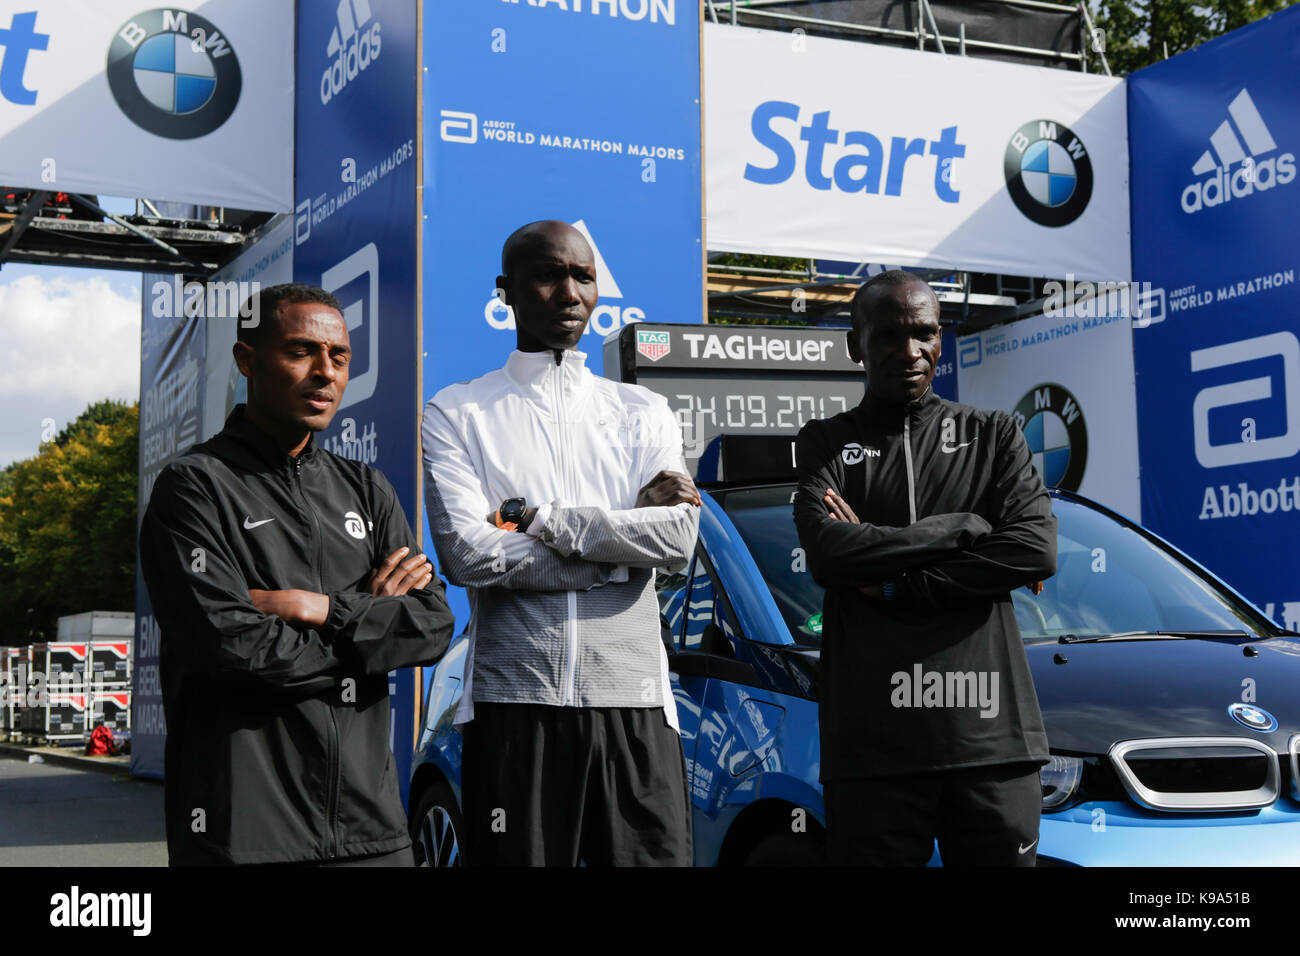 Kenenisa Bekele from Ethiopia, Eliud Kipchoge from Kenya and Wilson Kipsang from Kenya pose for the cameras at the starting line.  The leading male and female runners for the 44th BMW Berlin Marathon as well as two Guinness Worlds Records contestants posed for the cameras at the starting line of the marathon. Stock Photo